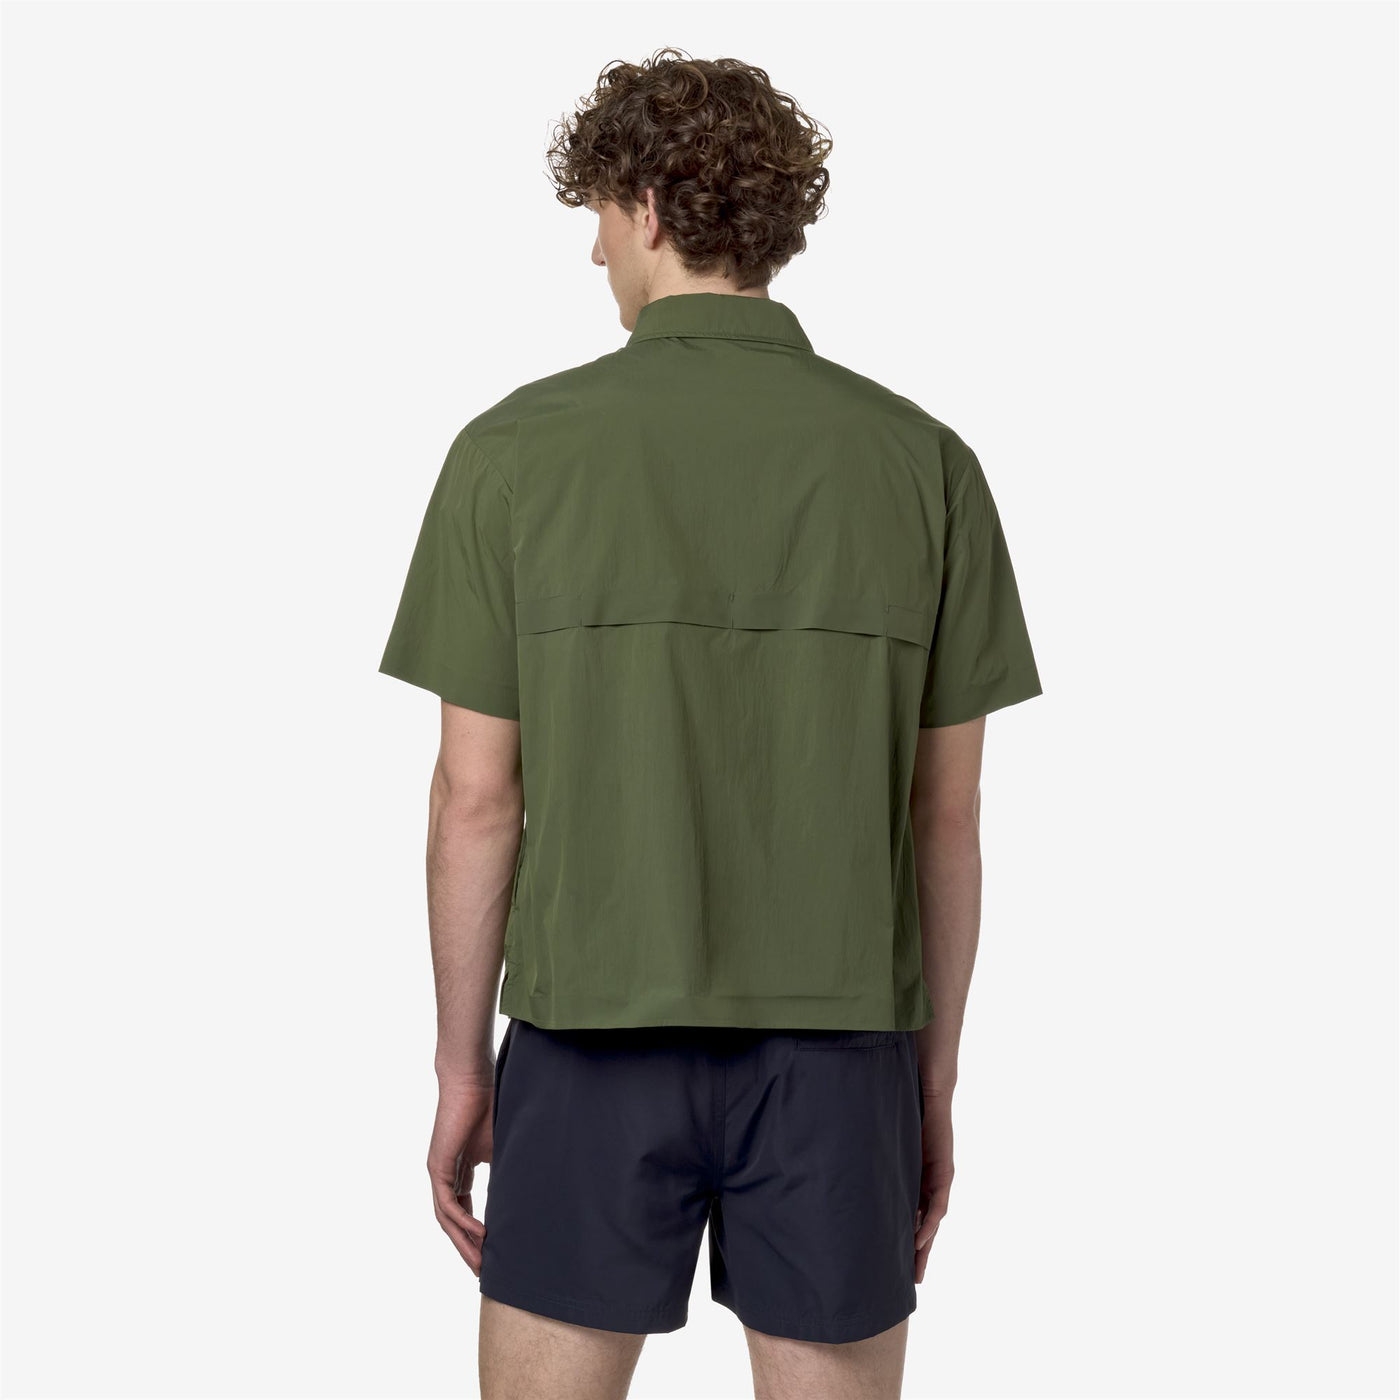 Jackets Man LICONCY Short GREEN CYPRESS Dressed Front Double		